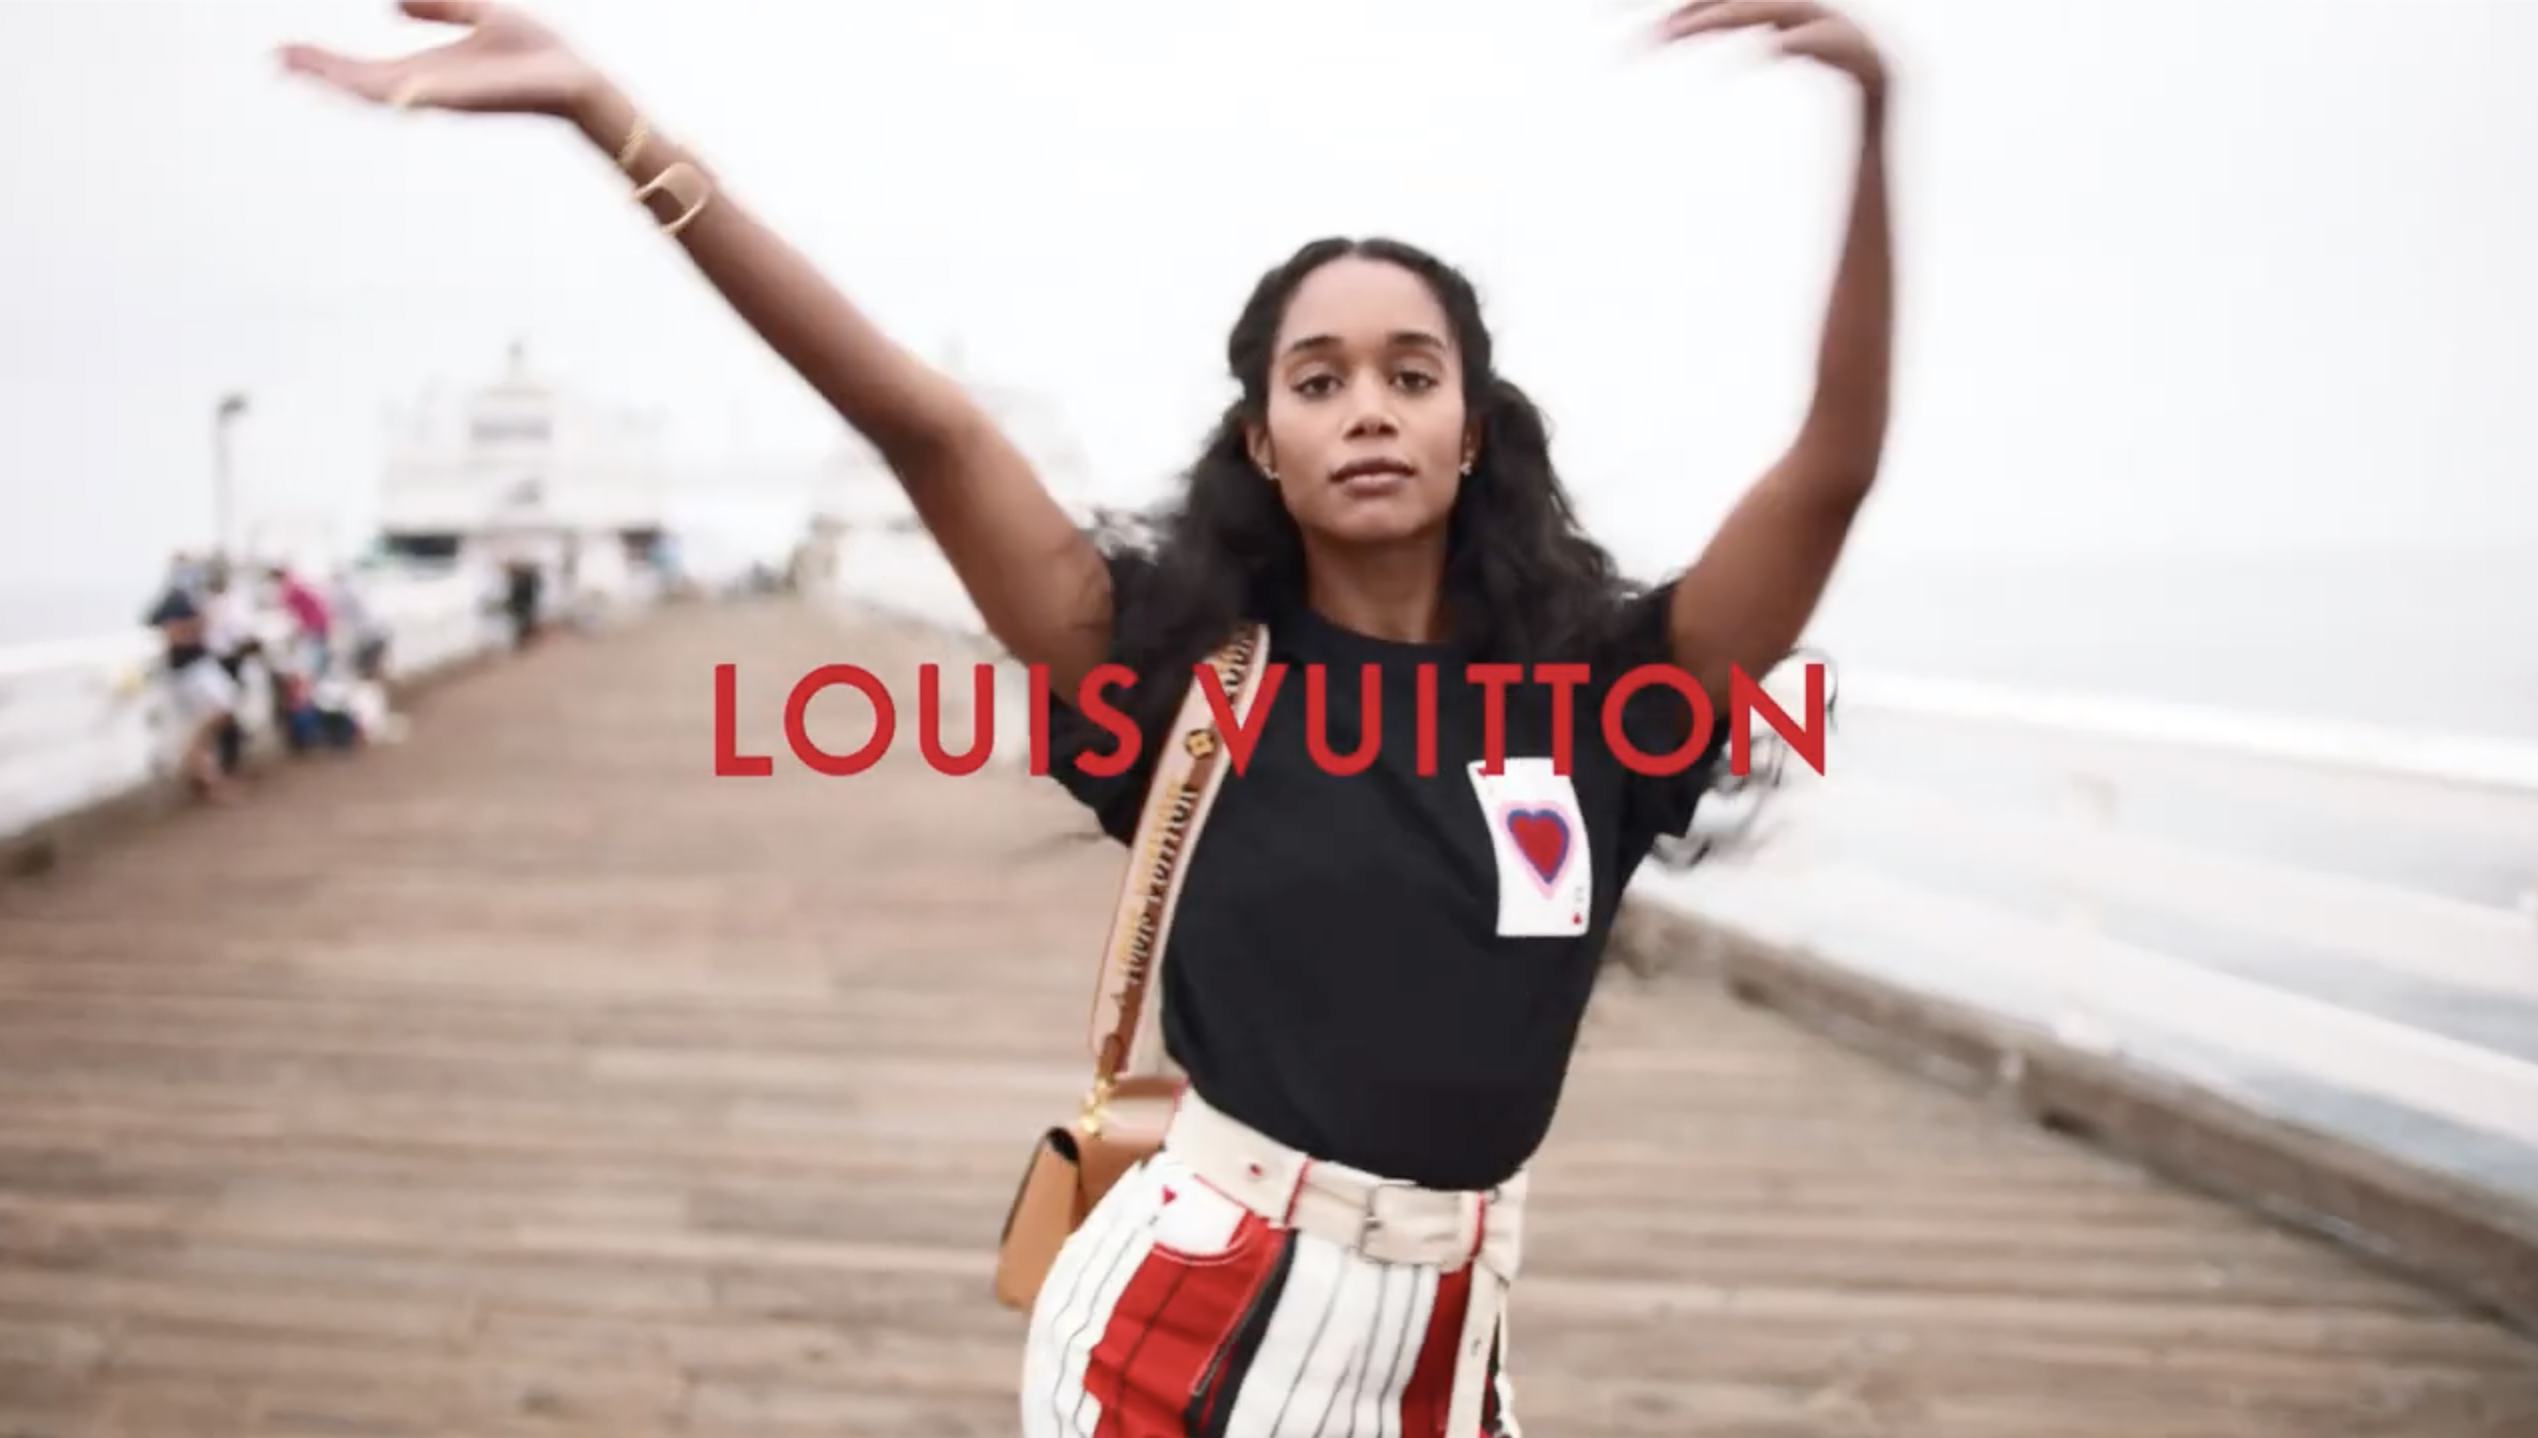 Laura Harrier Carrying a Louis Vuitton New Wave Chain Bag